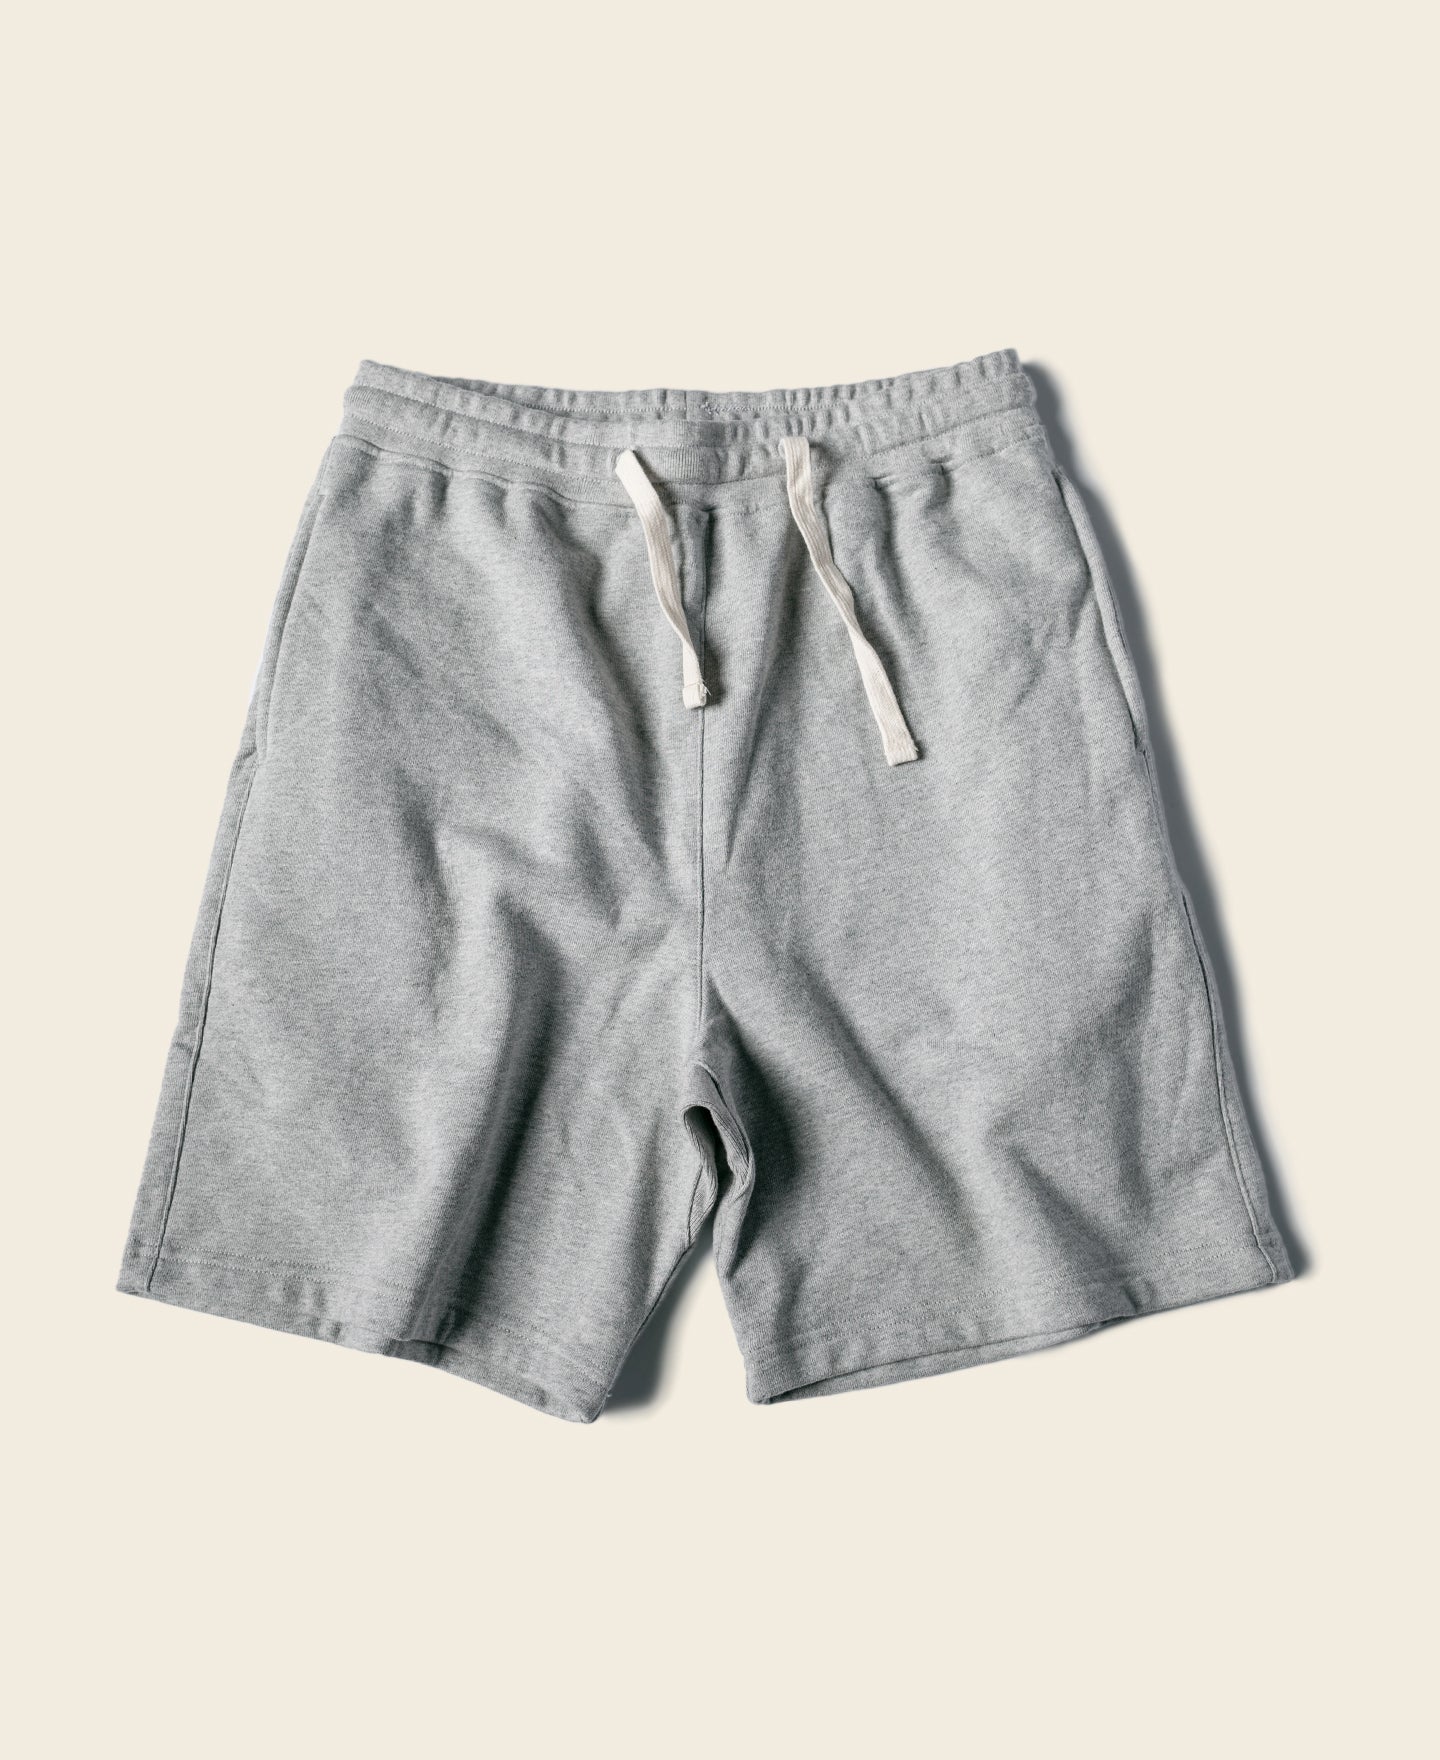 New Bench French Terry Shorts for your dad or daddy! $17.99 each